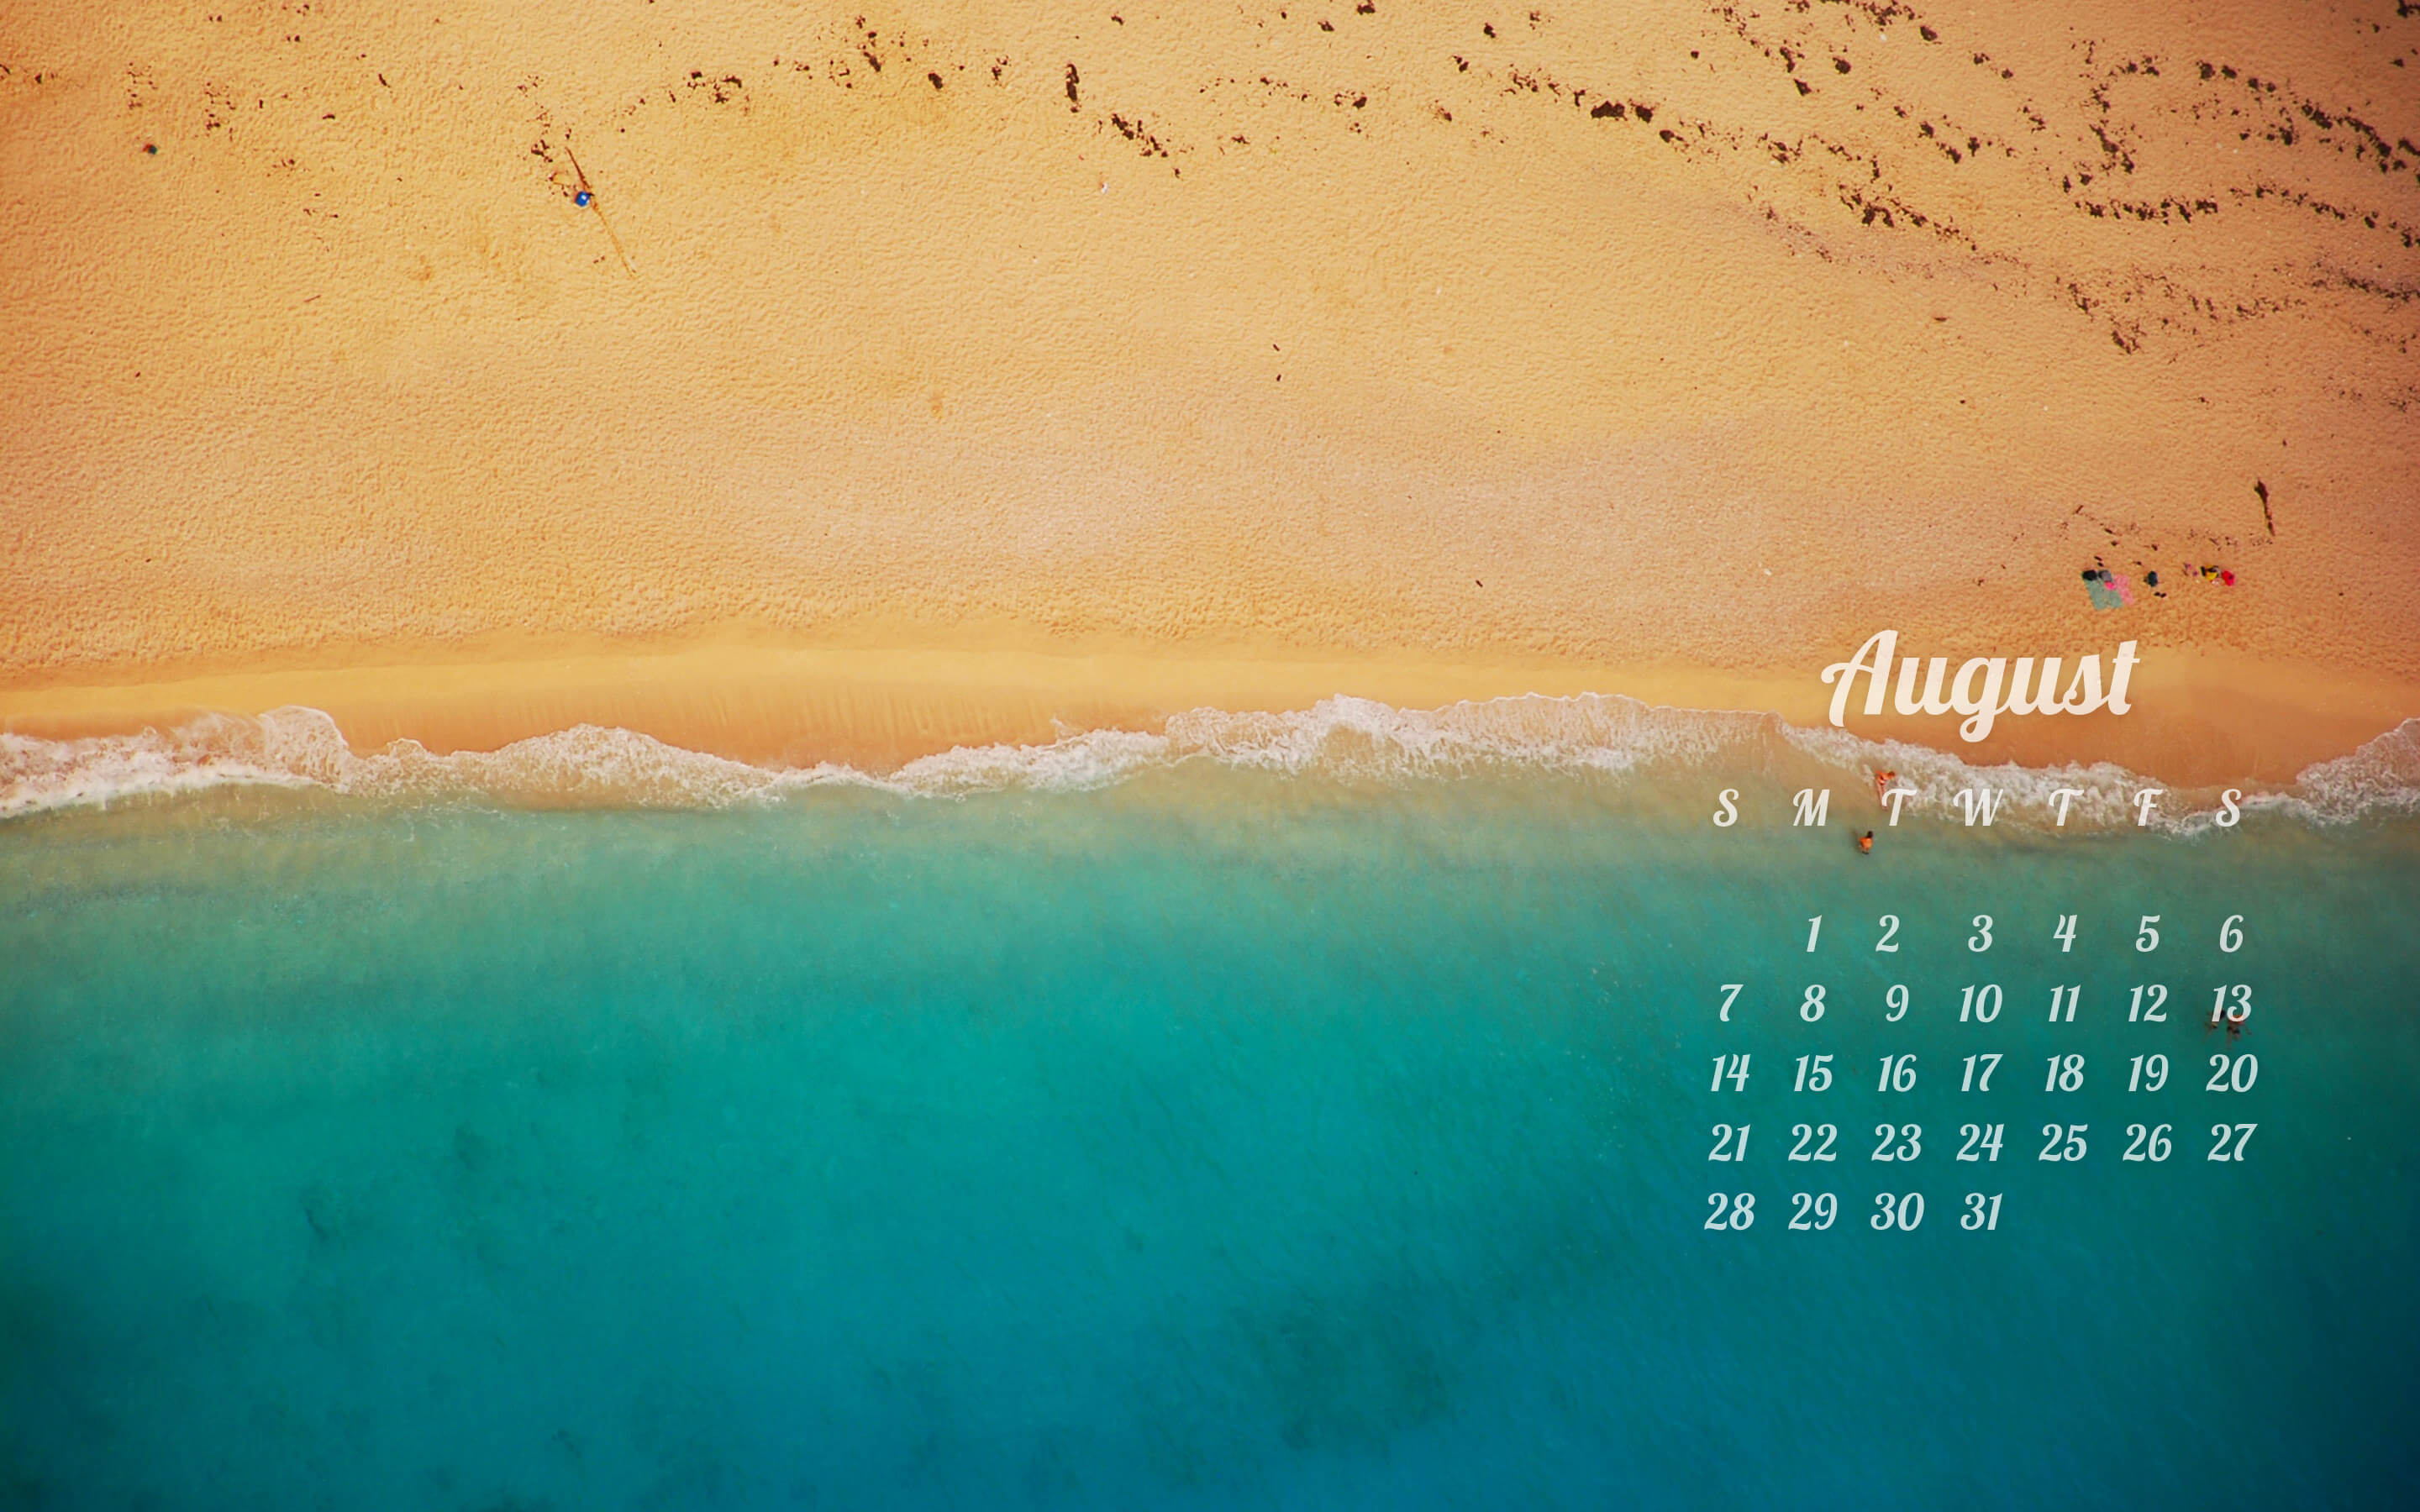 august-calendar-2016-hd-others-4k-wallpapers-images-backgrounds